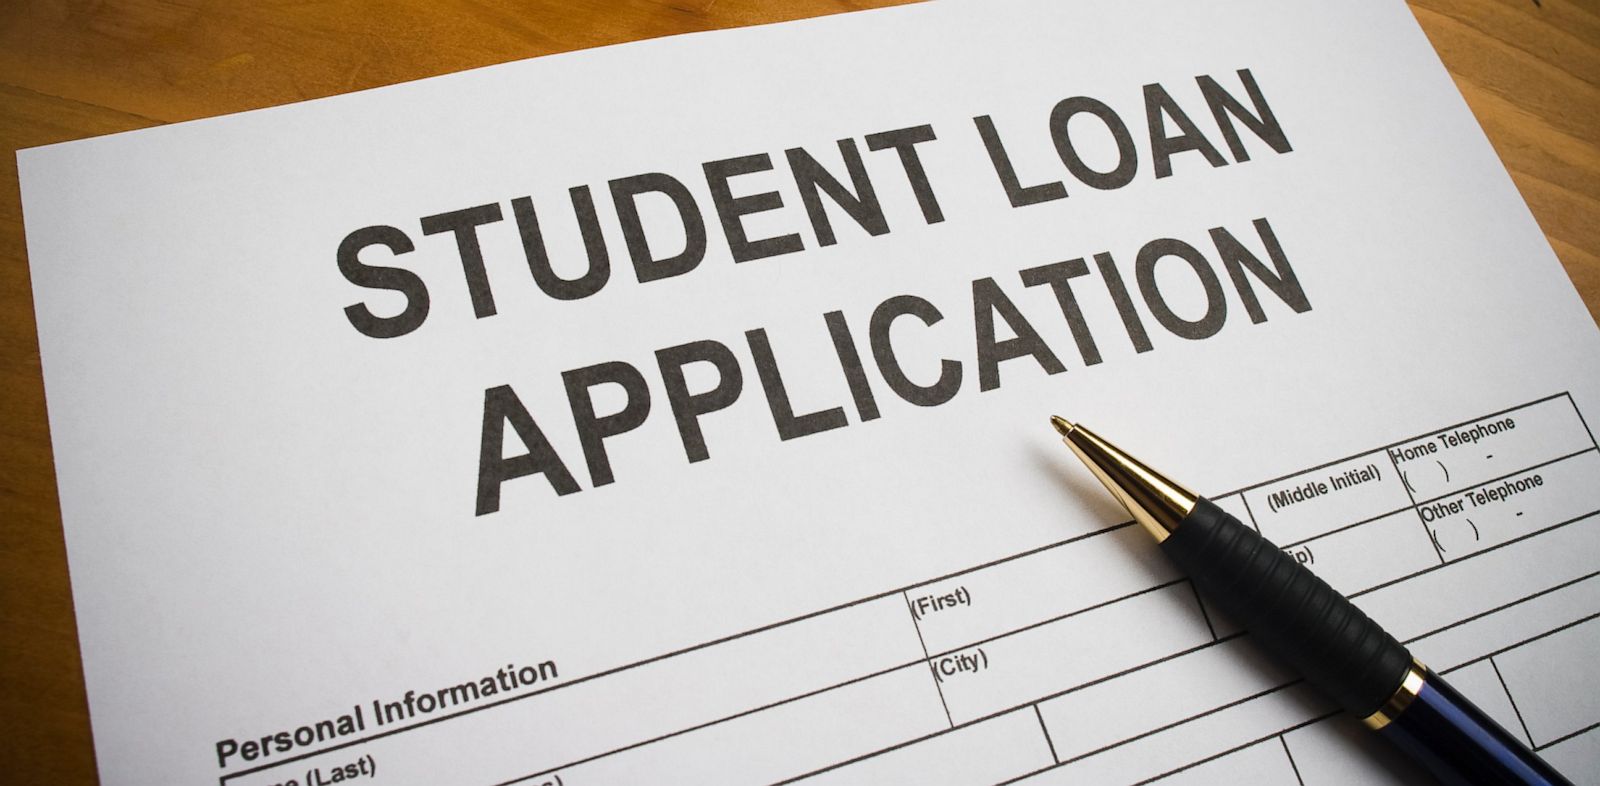 List of Banks Offering Student Loan In Nigeria